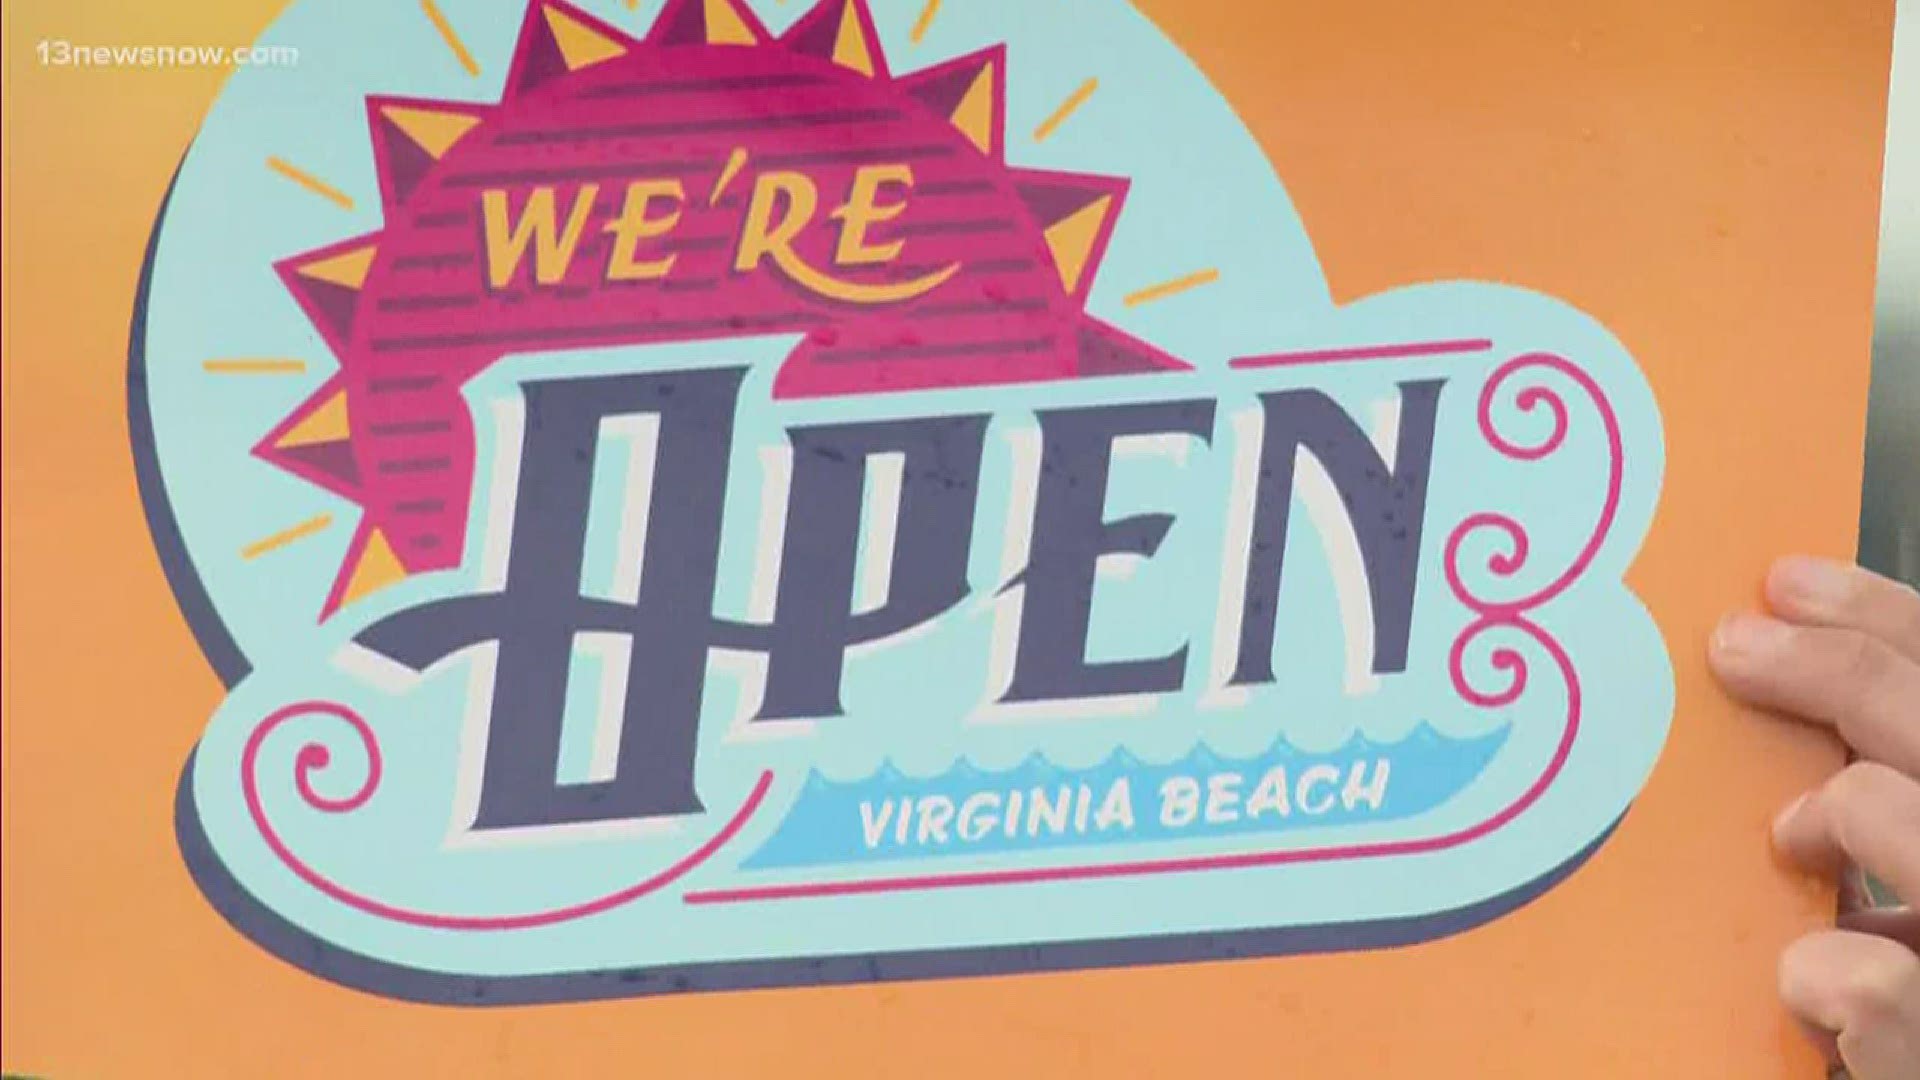 Virginia Beach officials created a new campaign geared toward tourists. They said regardless of the pandemic, they hope people plan to vacation in the resort city.